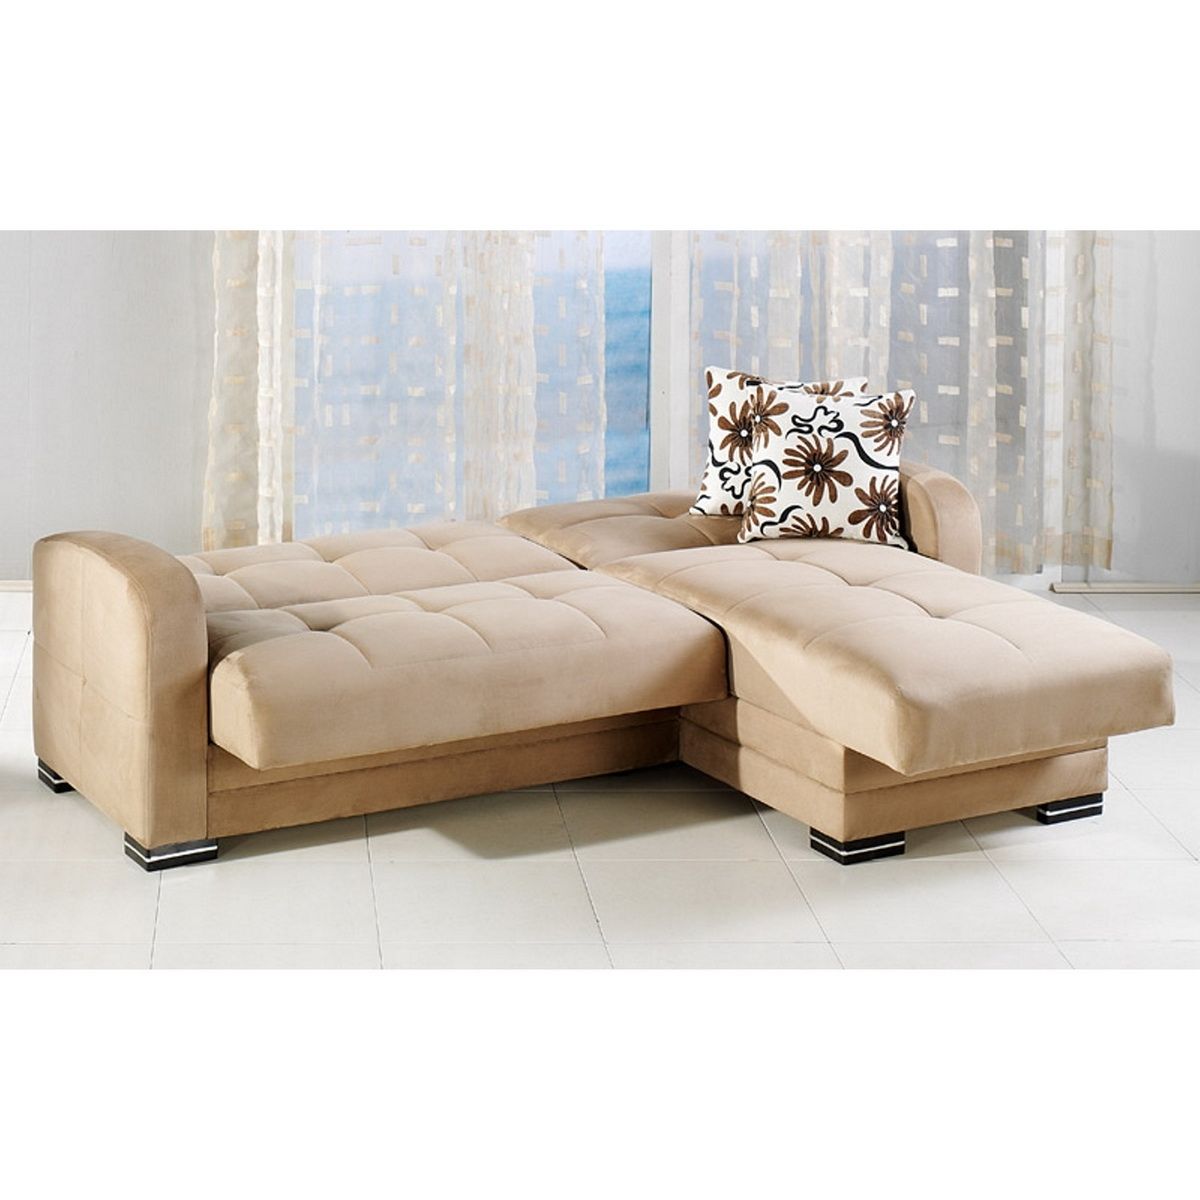 Sale: $1079.00 Kubo Sectional Sofa | Rainbow Dark Beige | Sectional Intended For Nyc Sectional Sofas (Photo 9 of 10)